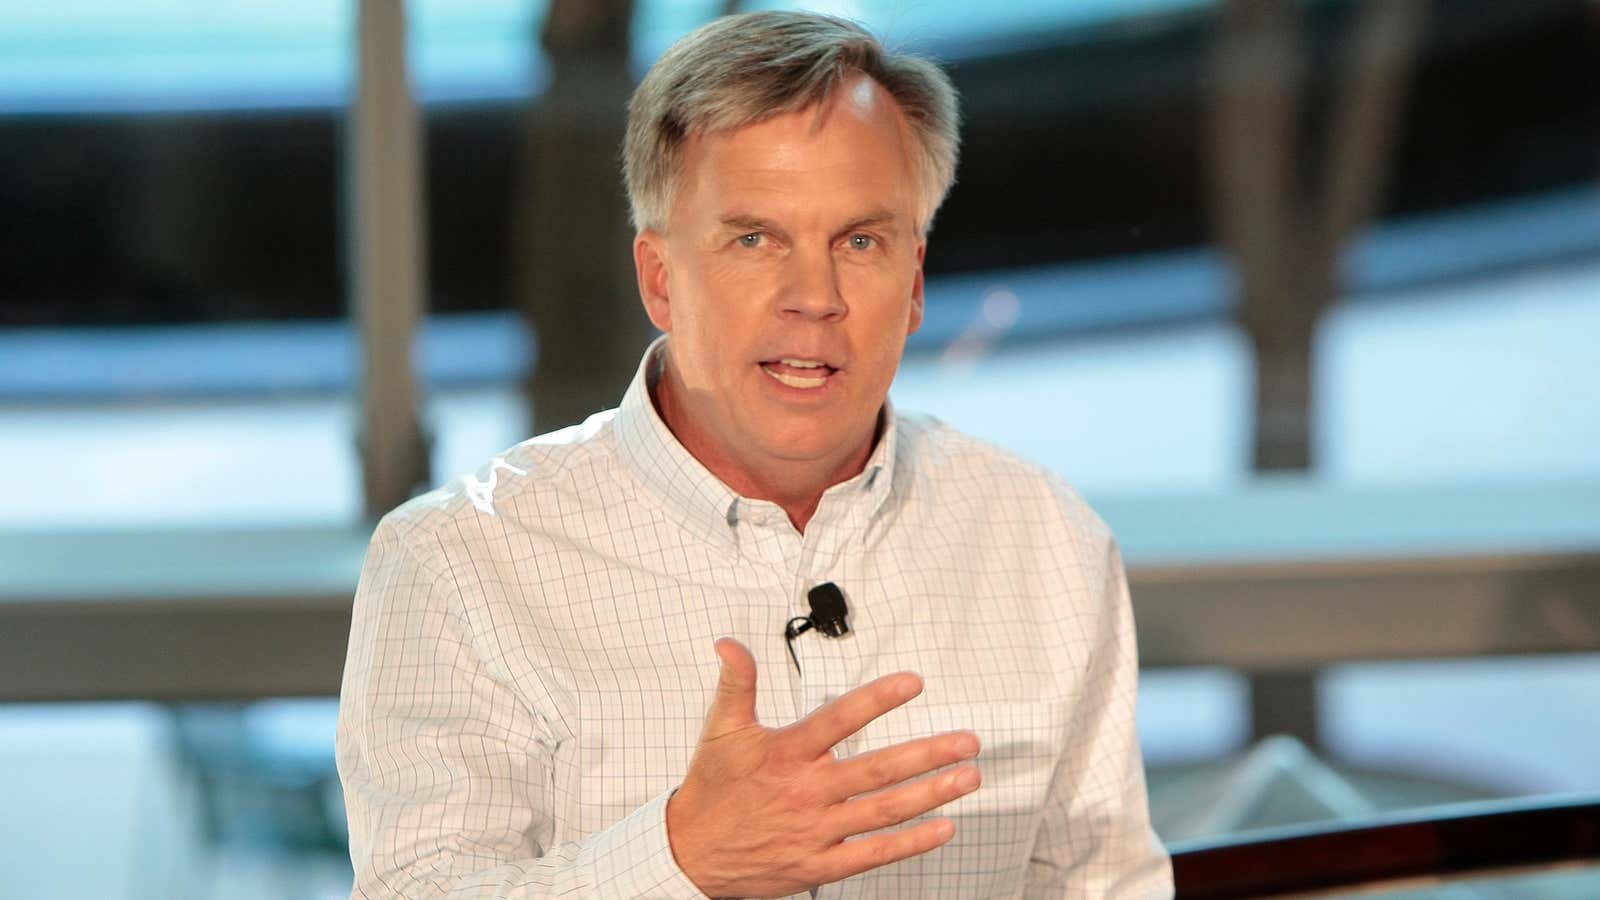 Ron Johnson may have realized too late that JC Penney customers aren’t like Apple customers.